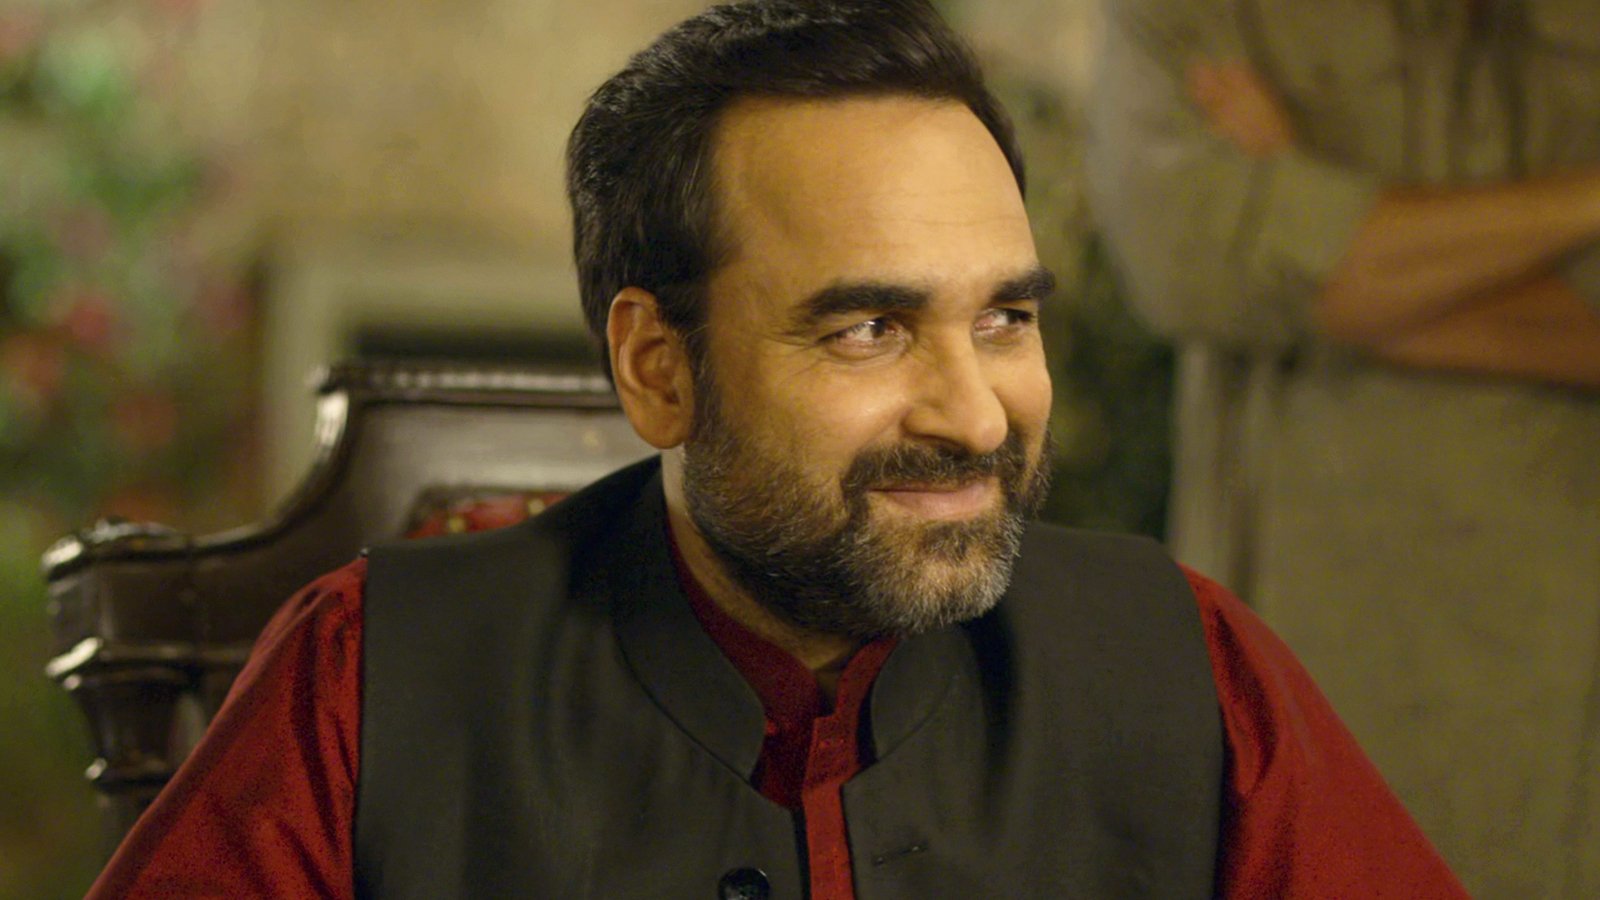 prime video IN i interest you in some smiling pics of kaleen bhaiya please?